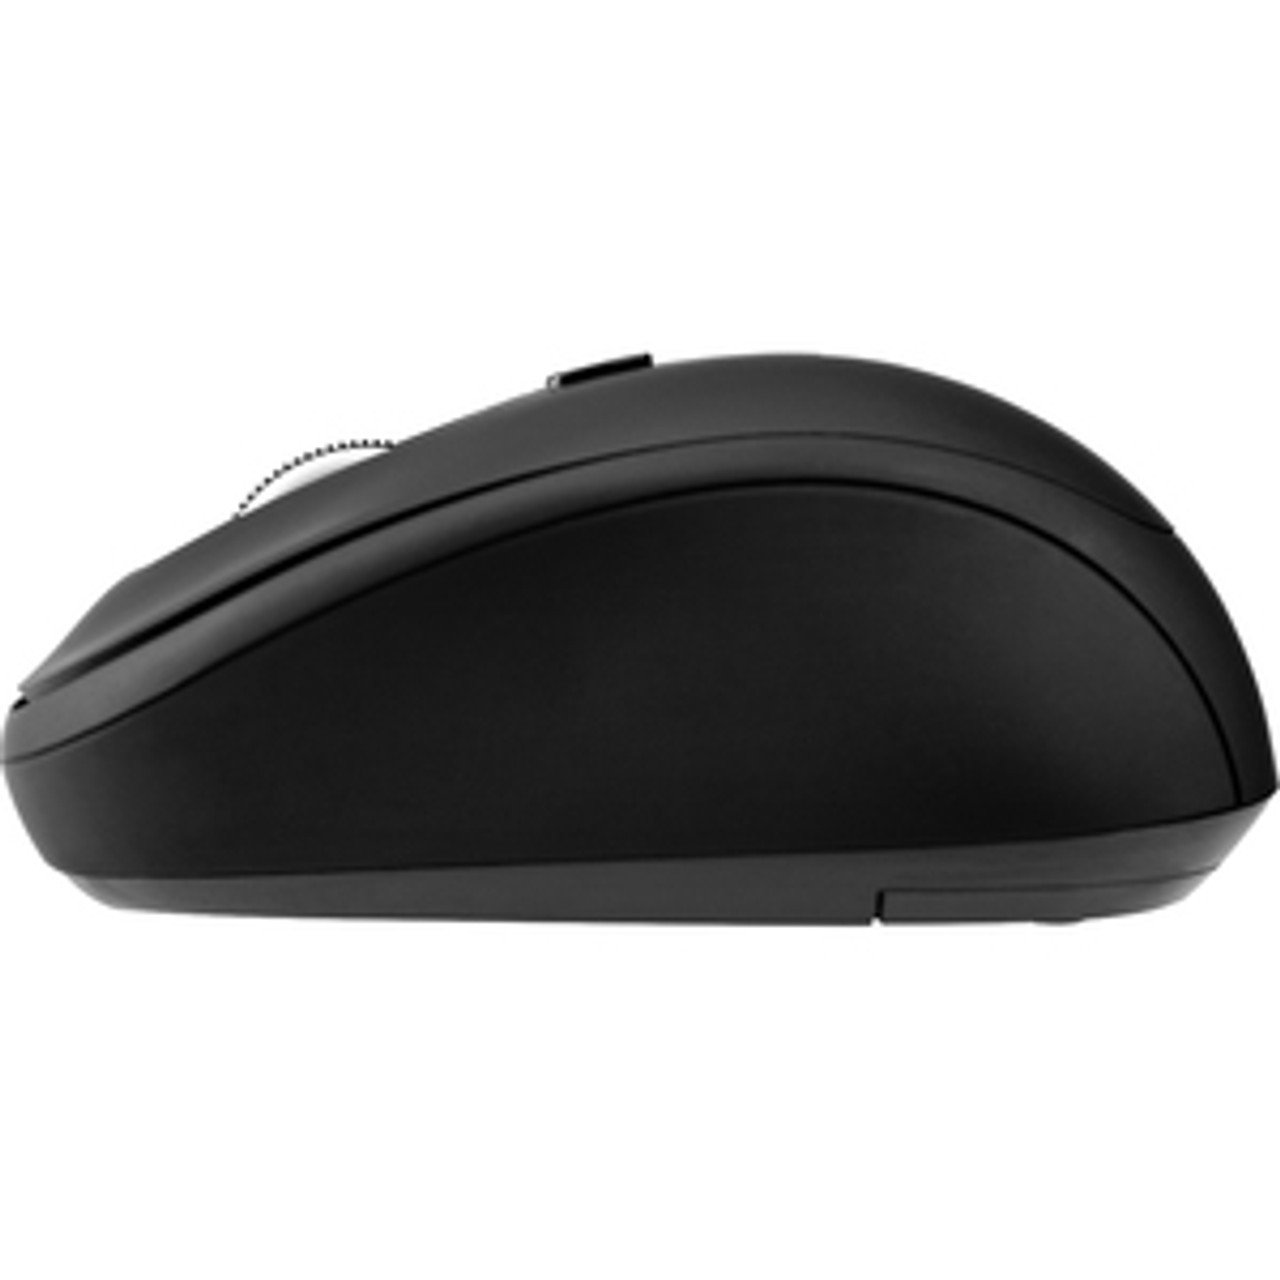 V7 4-Button Wireless Optical Mouse with Adjustable DPI